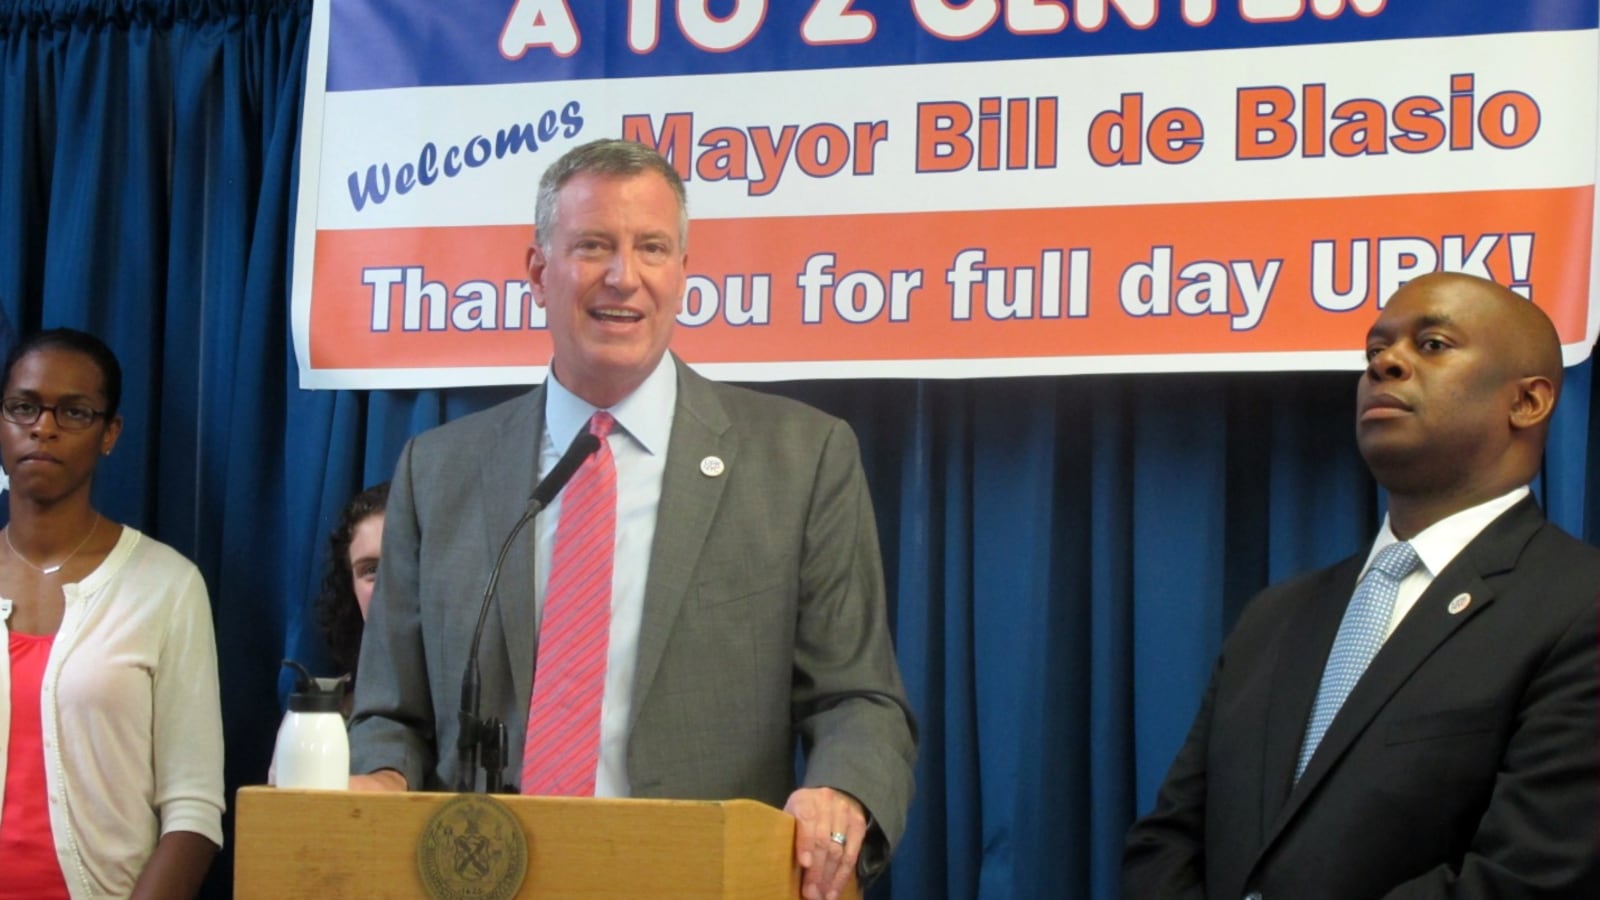 Mayor Bill de Blasio has made no distinctions between the different pre-K providers, only saying that they “will be held to the exact same high standards” as public schools.